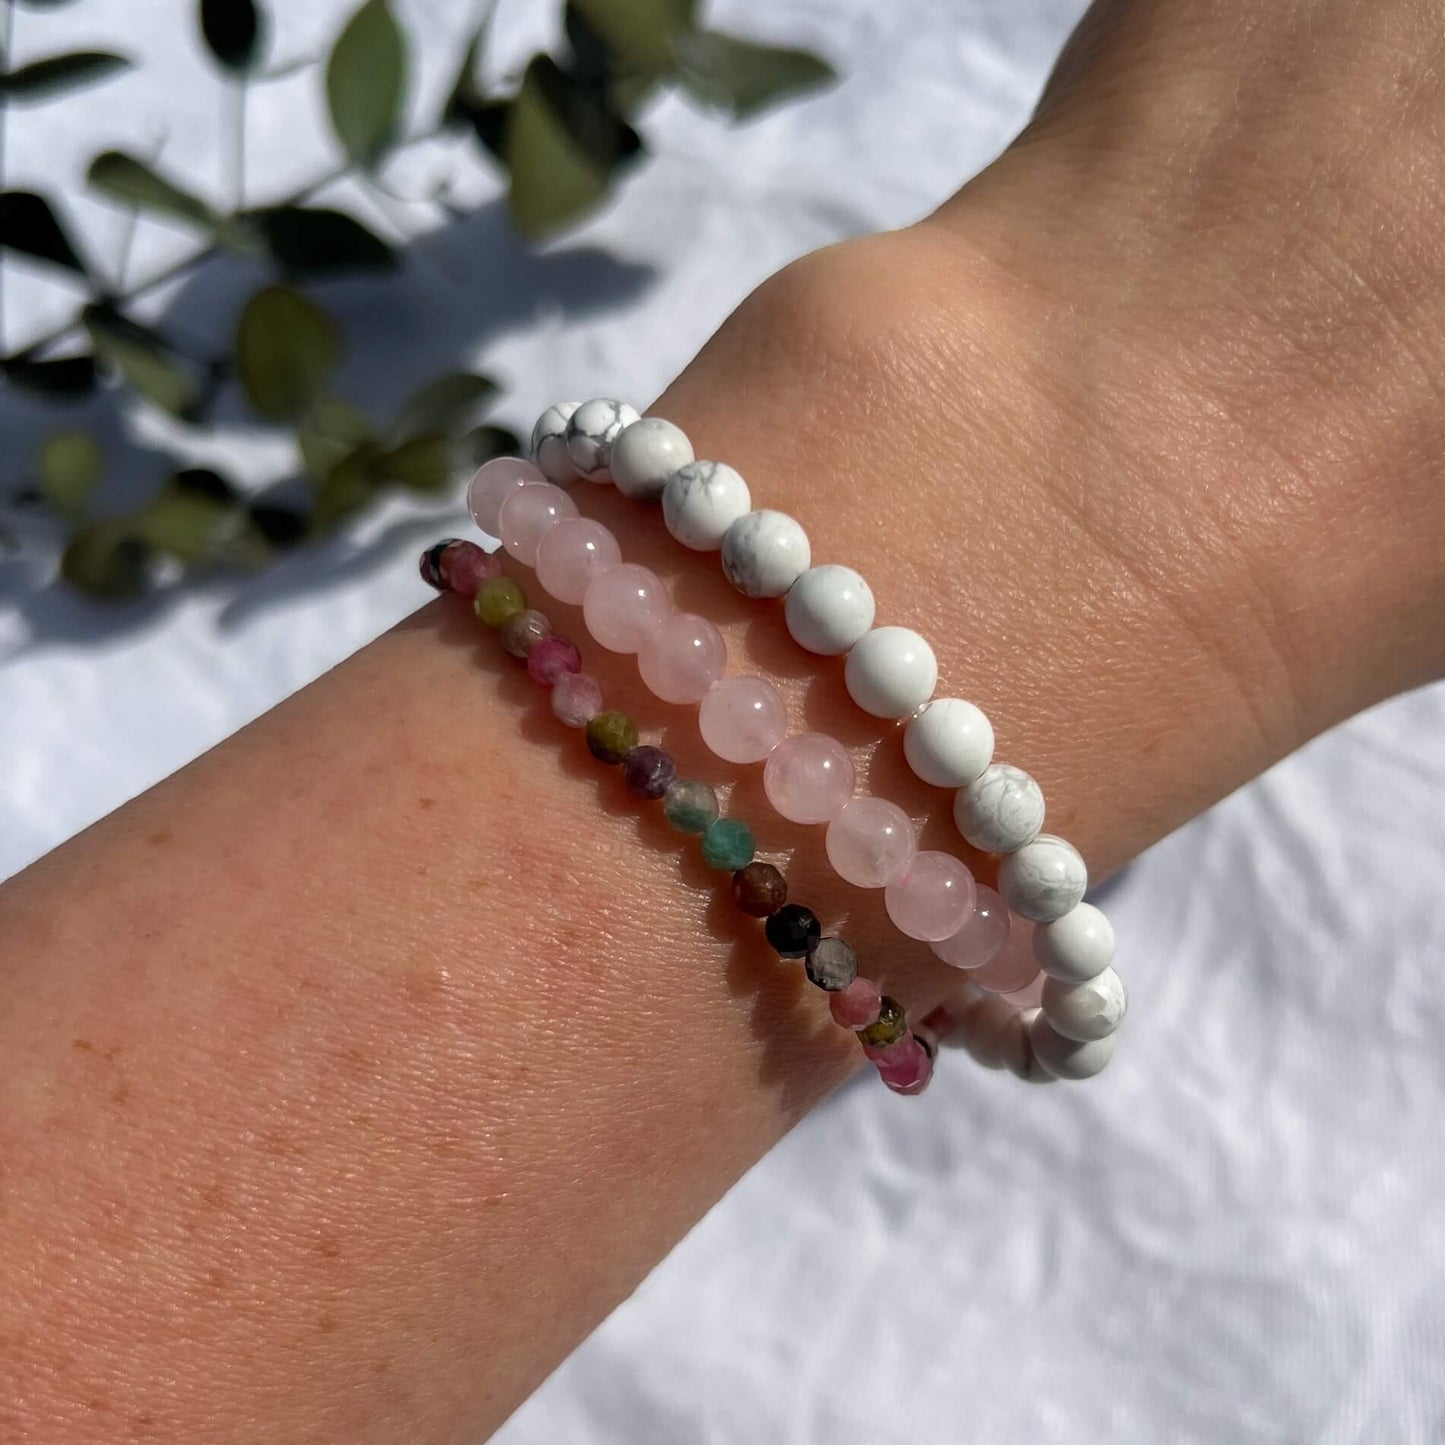 A woman's arm wearing three self love crystal bead bracelets in howlite, mixed tourmaline and rose quartz